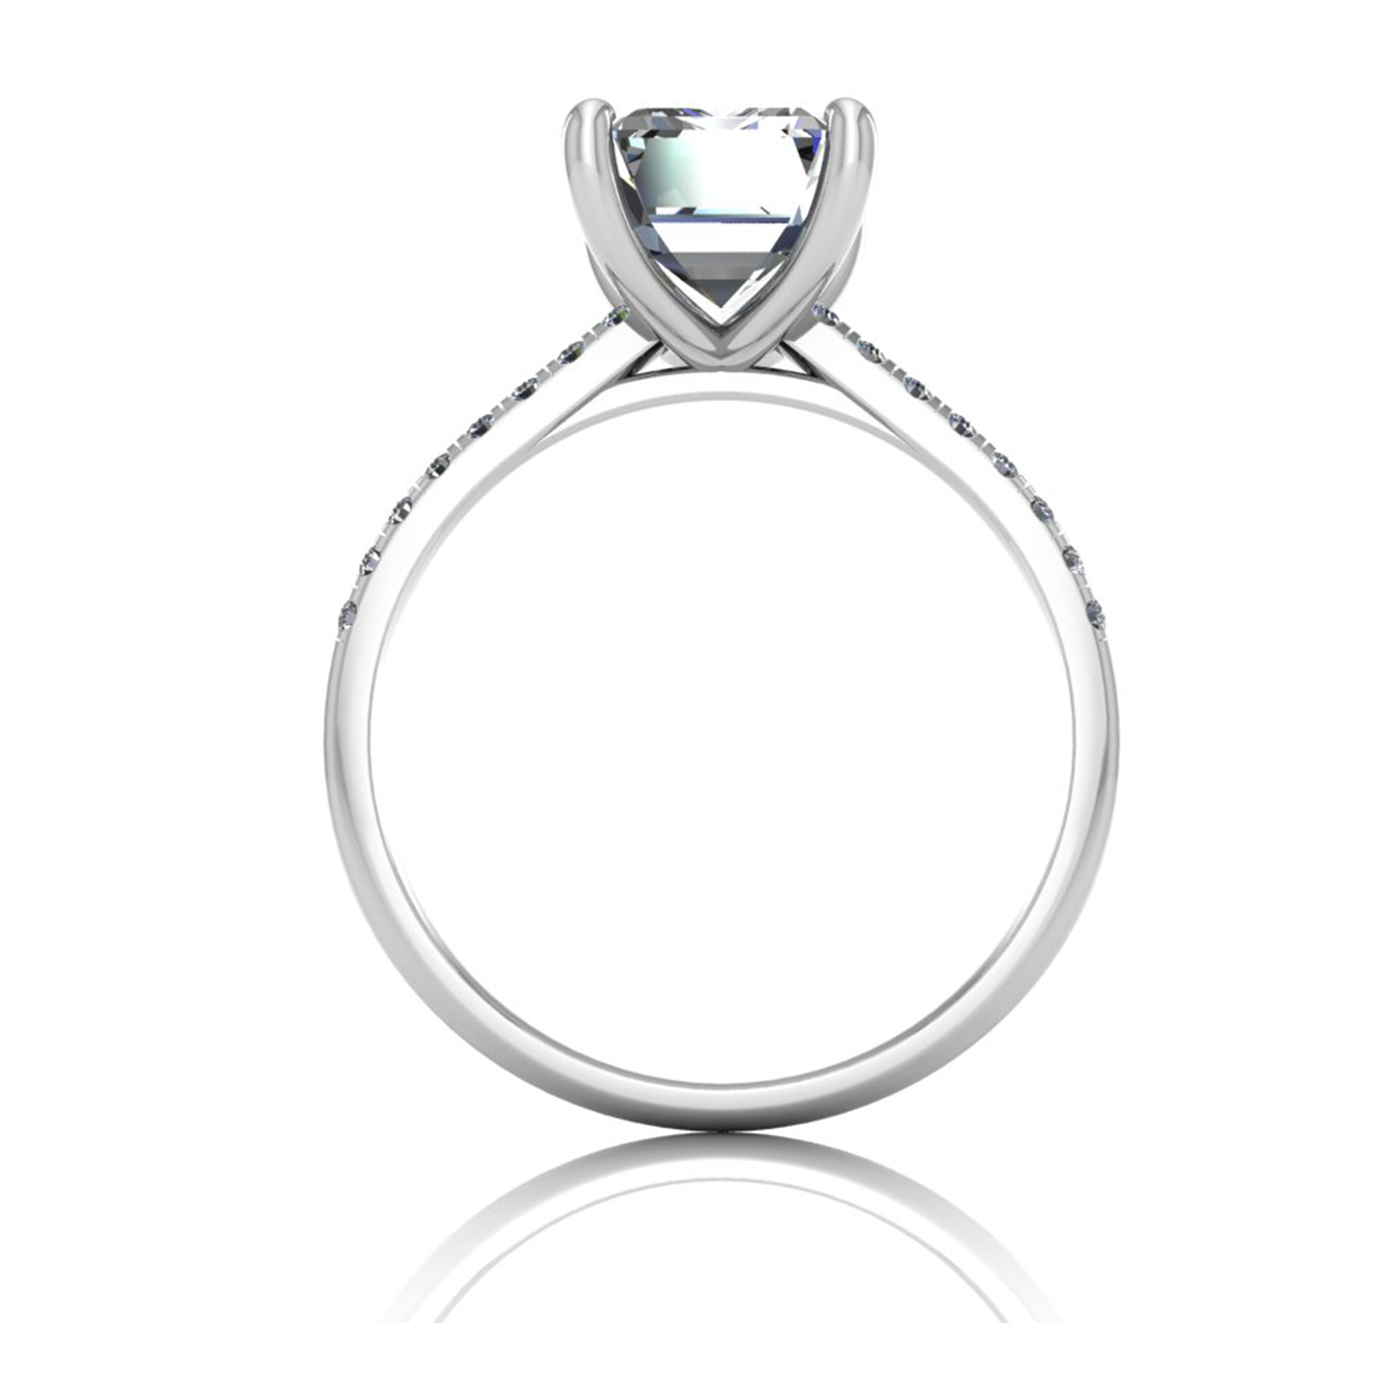 18k white gold 2.5ct 4 prongs emerald cut diamond engagement ring with whisper thin pavÉ set band